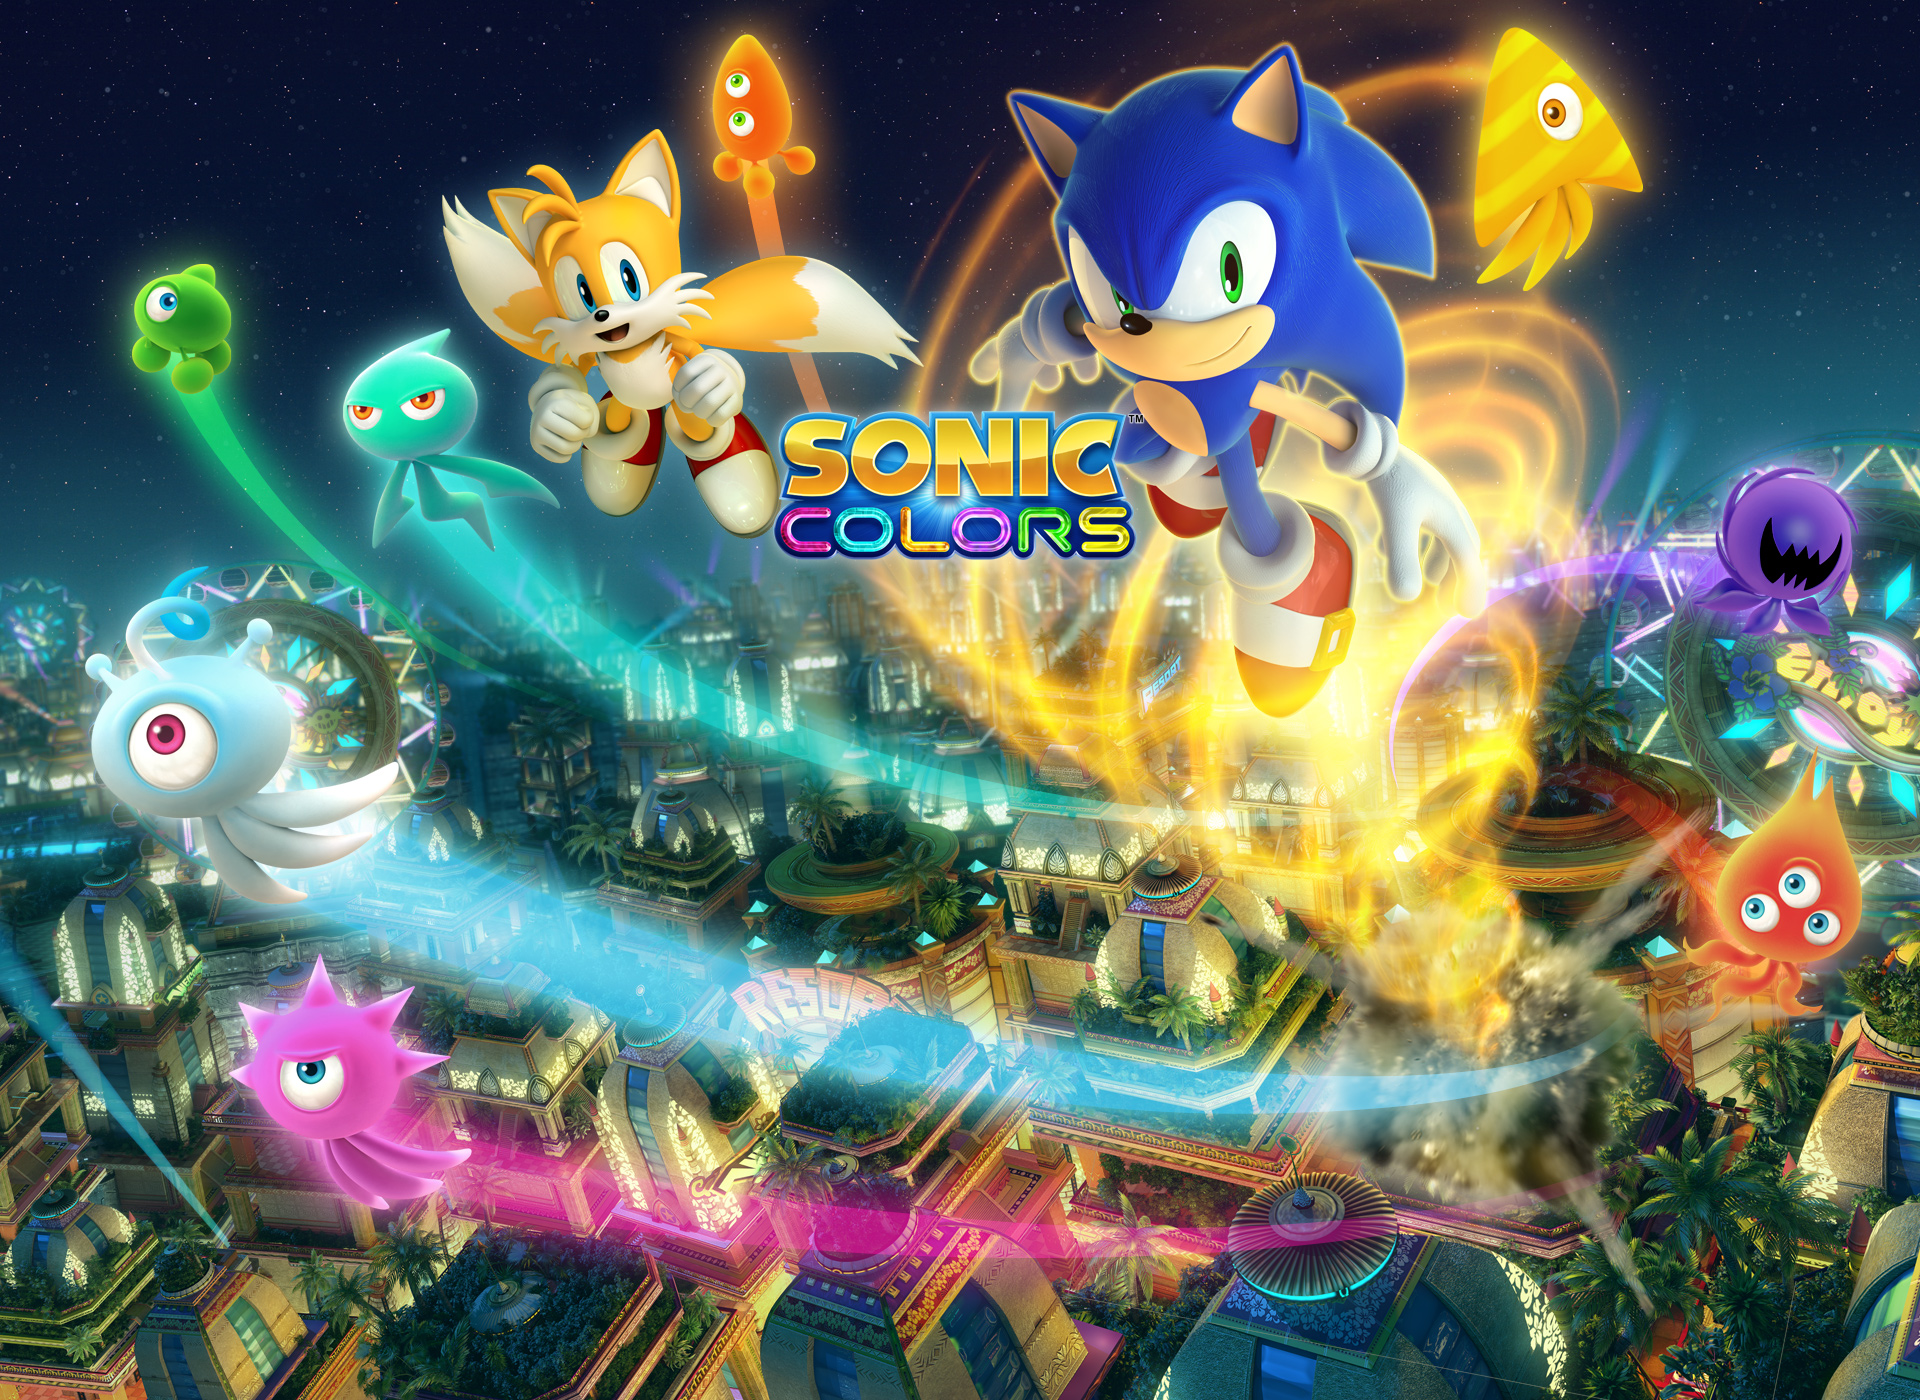 sonic the hedgehog wallpapers 2015 wallpaper cave on sonic colors wallpapers